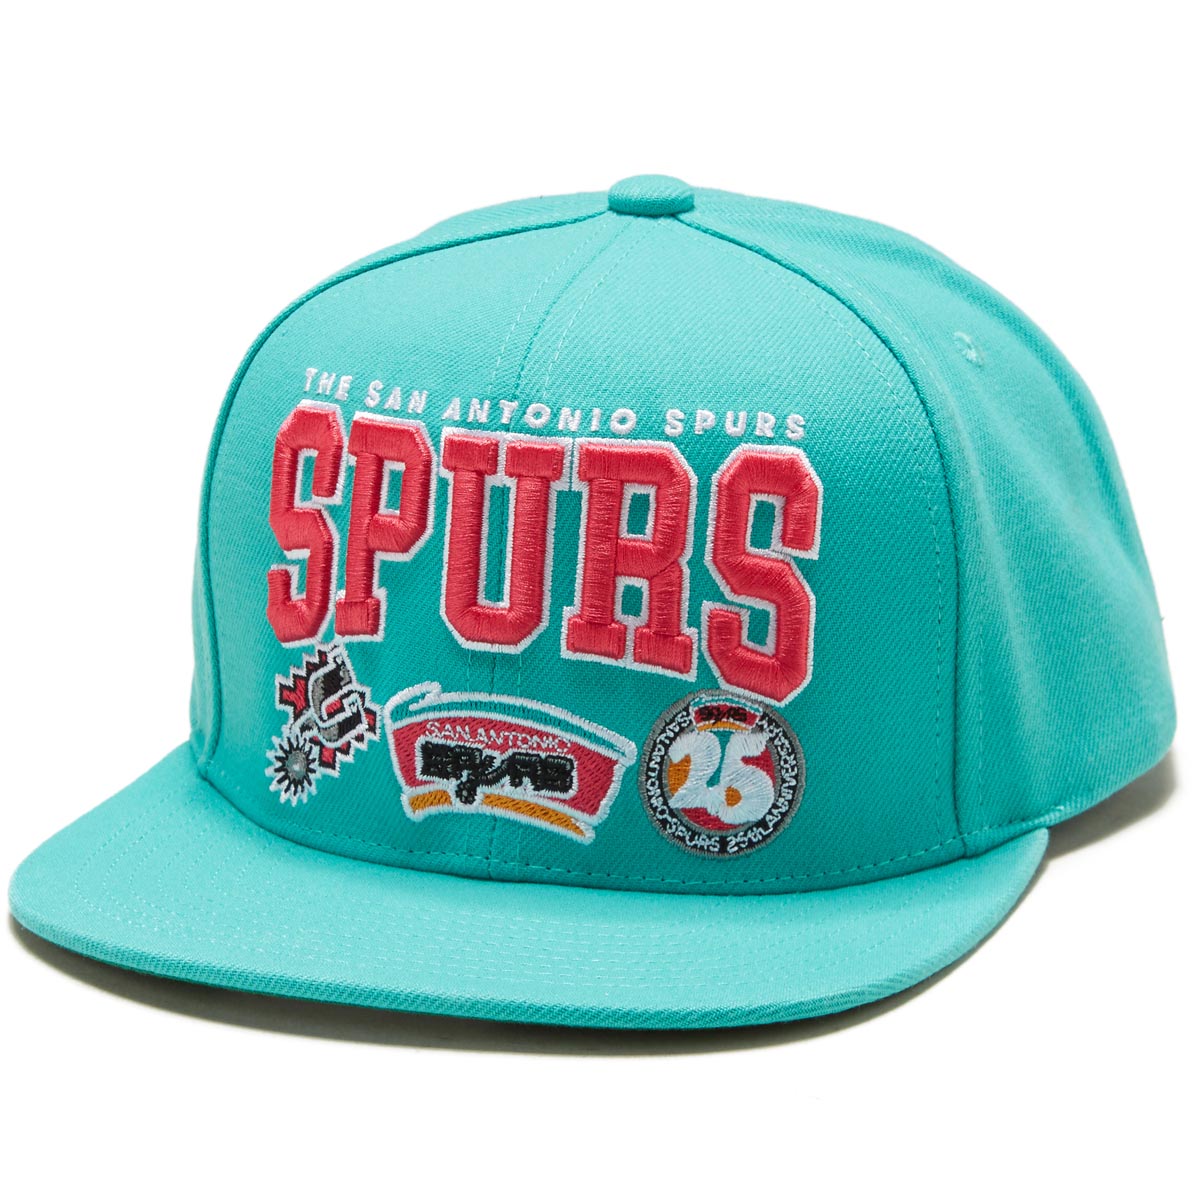 Mitchell & Ness x NBA Champ Stack Snapback Spurs Hat - Teal image 1